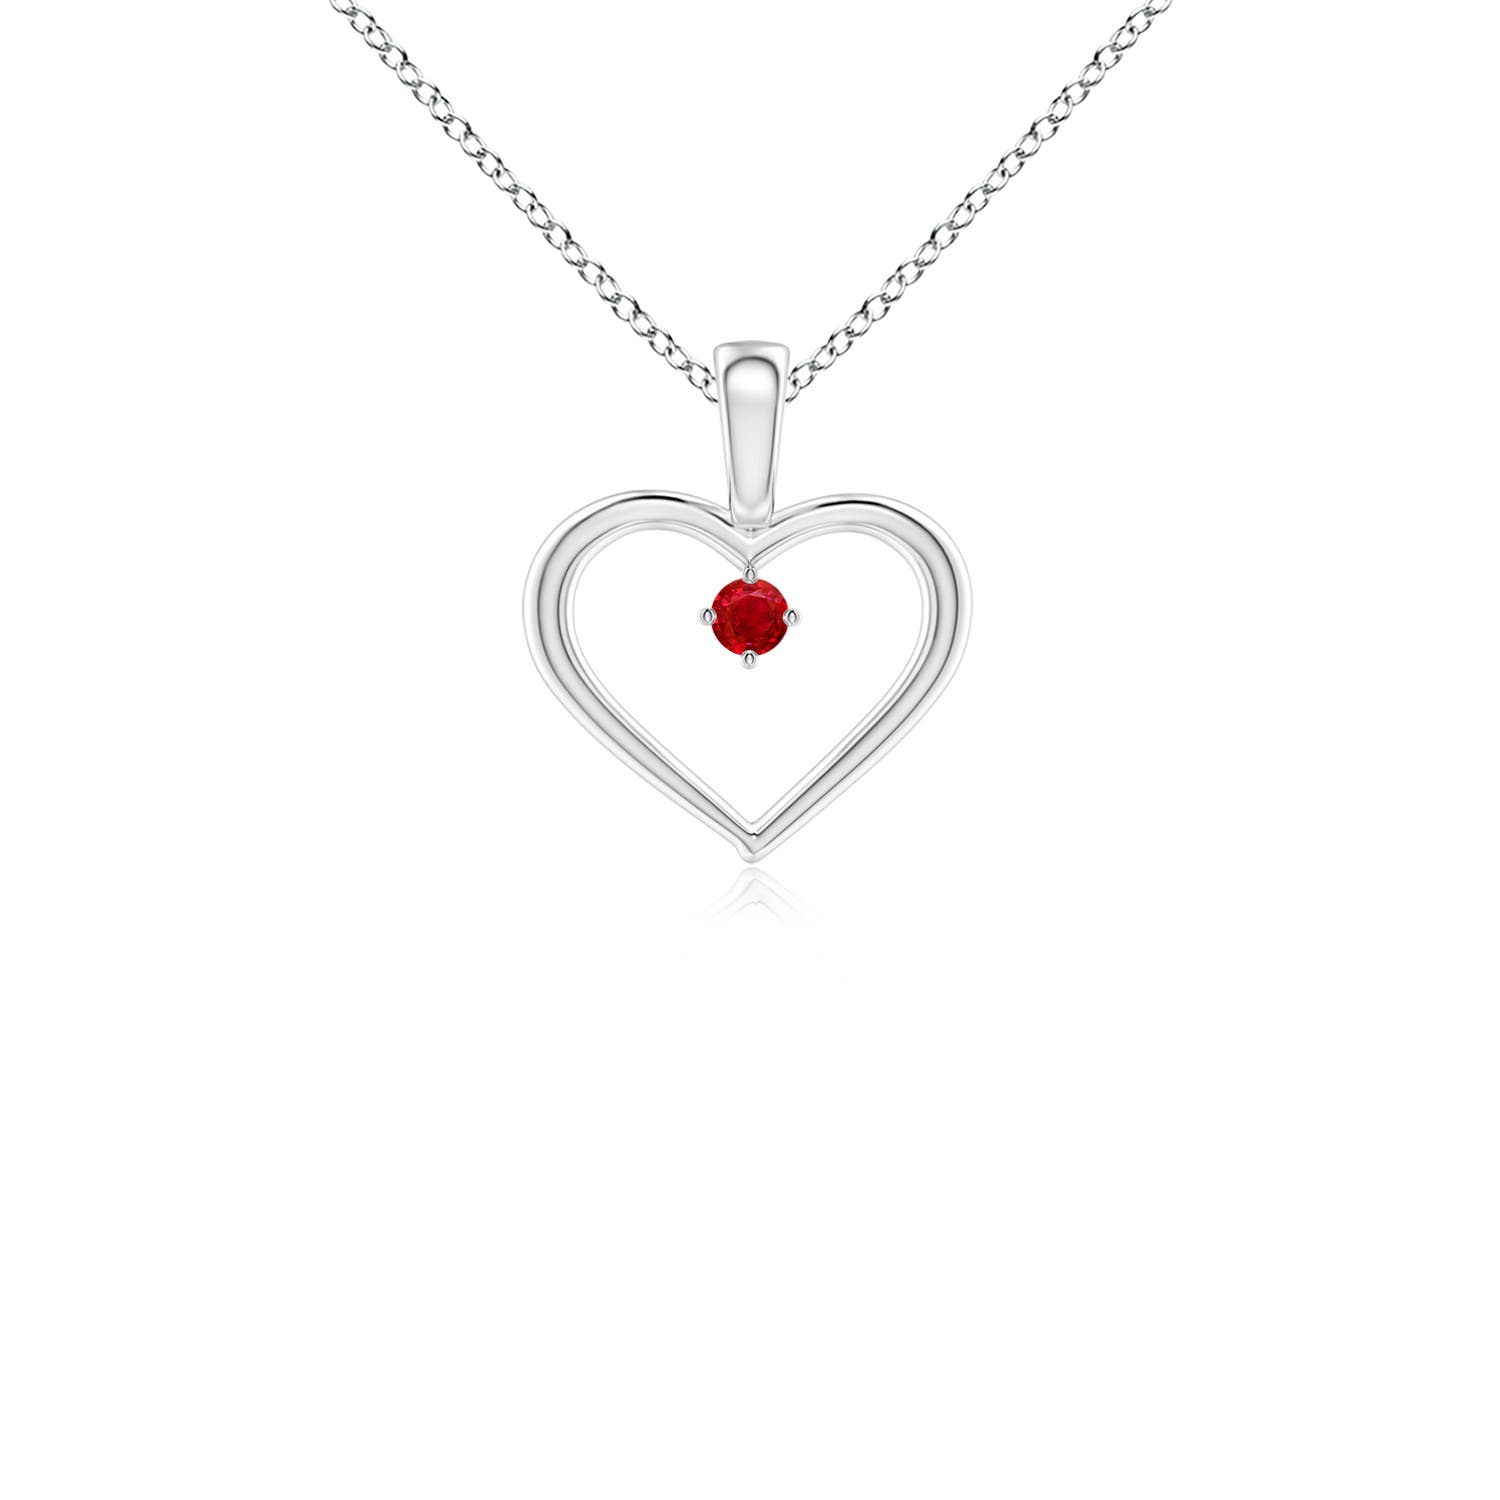 AAA - Ruby / 0.09 CT / 14 KT White Gold